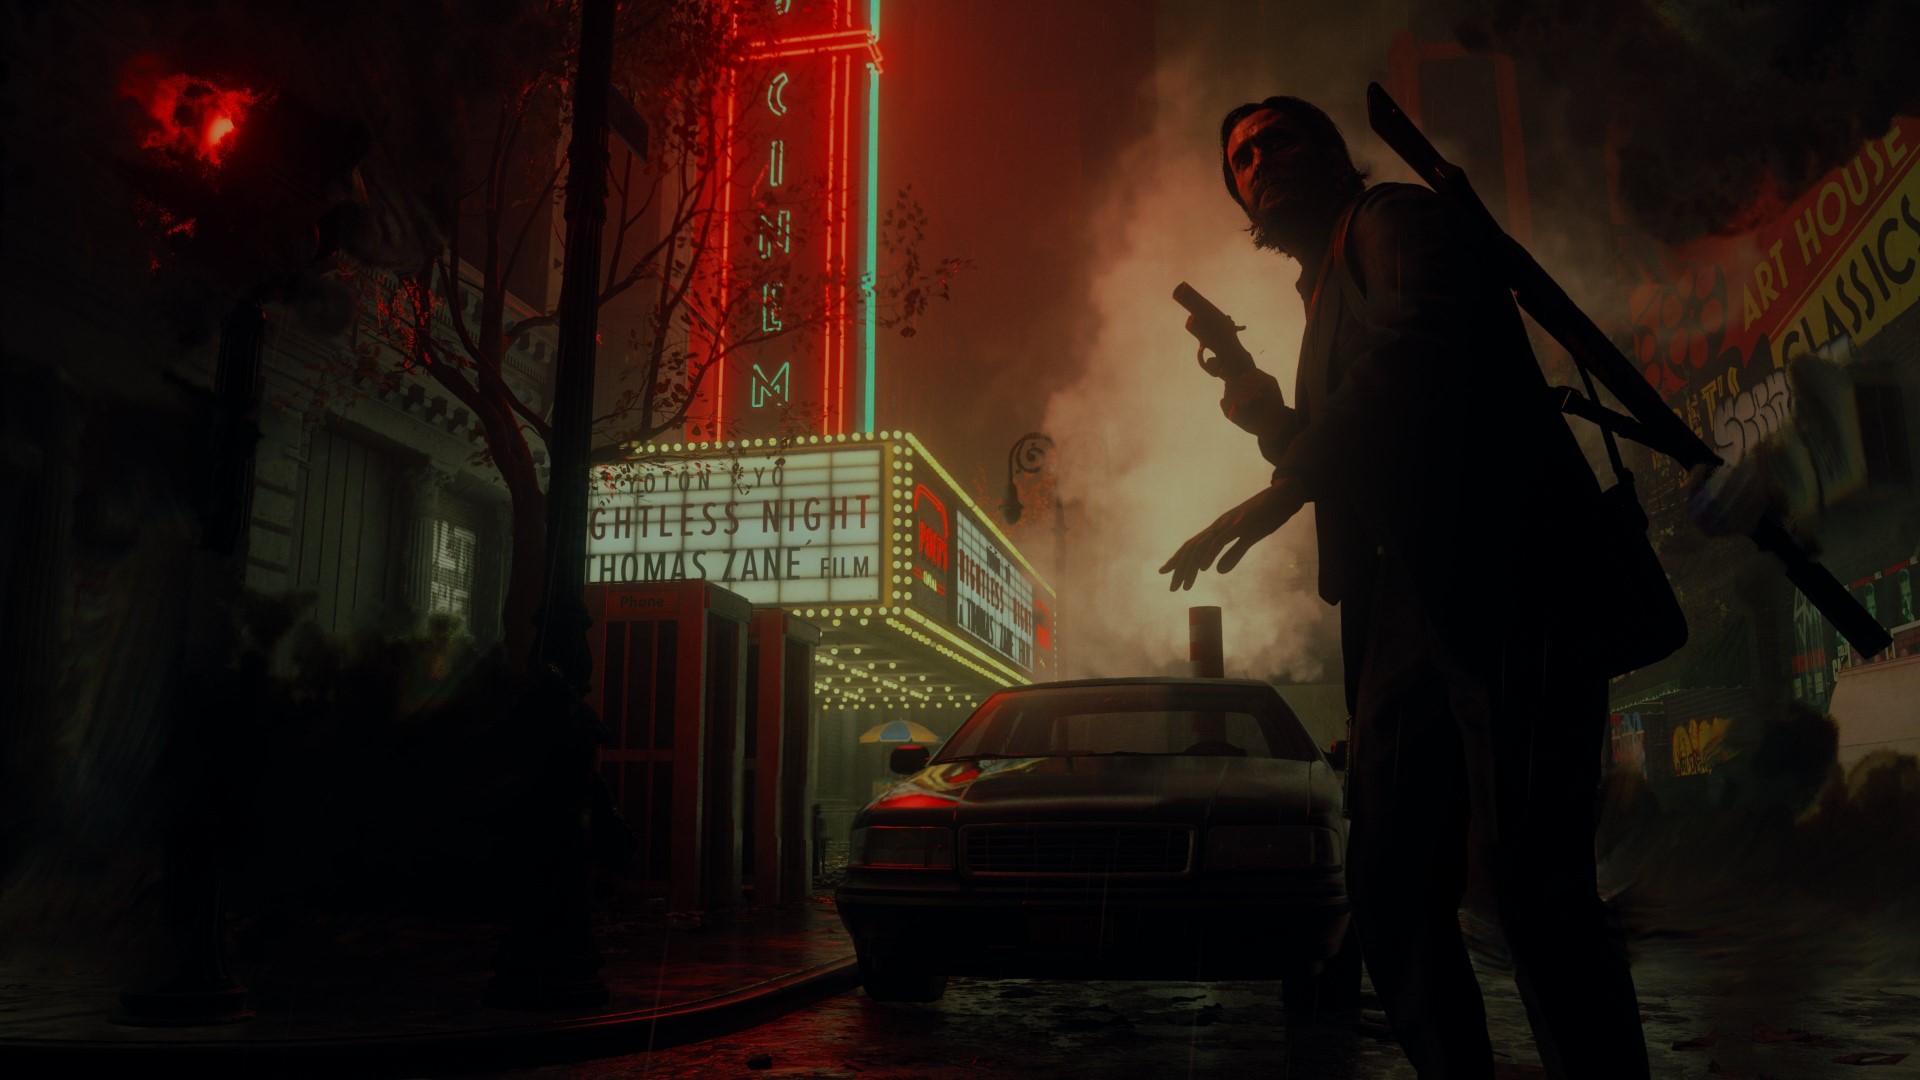 Alan Wake 2 PC performance and best settings